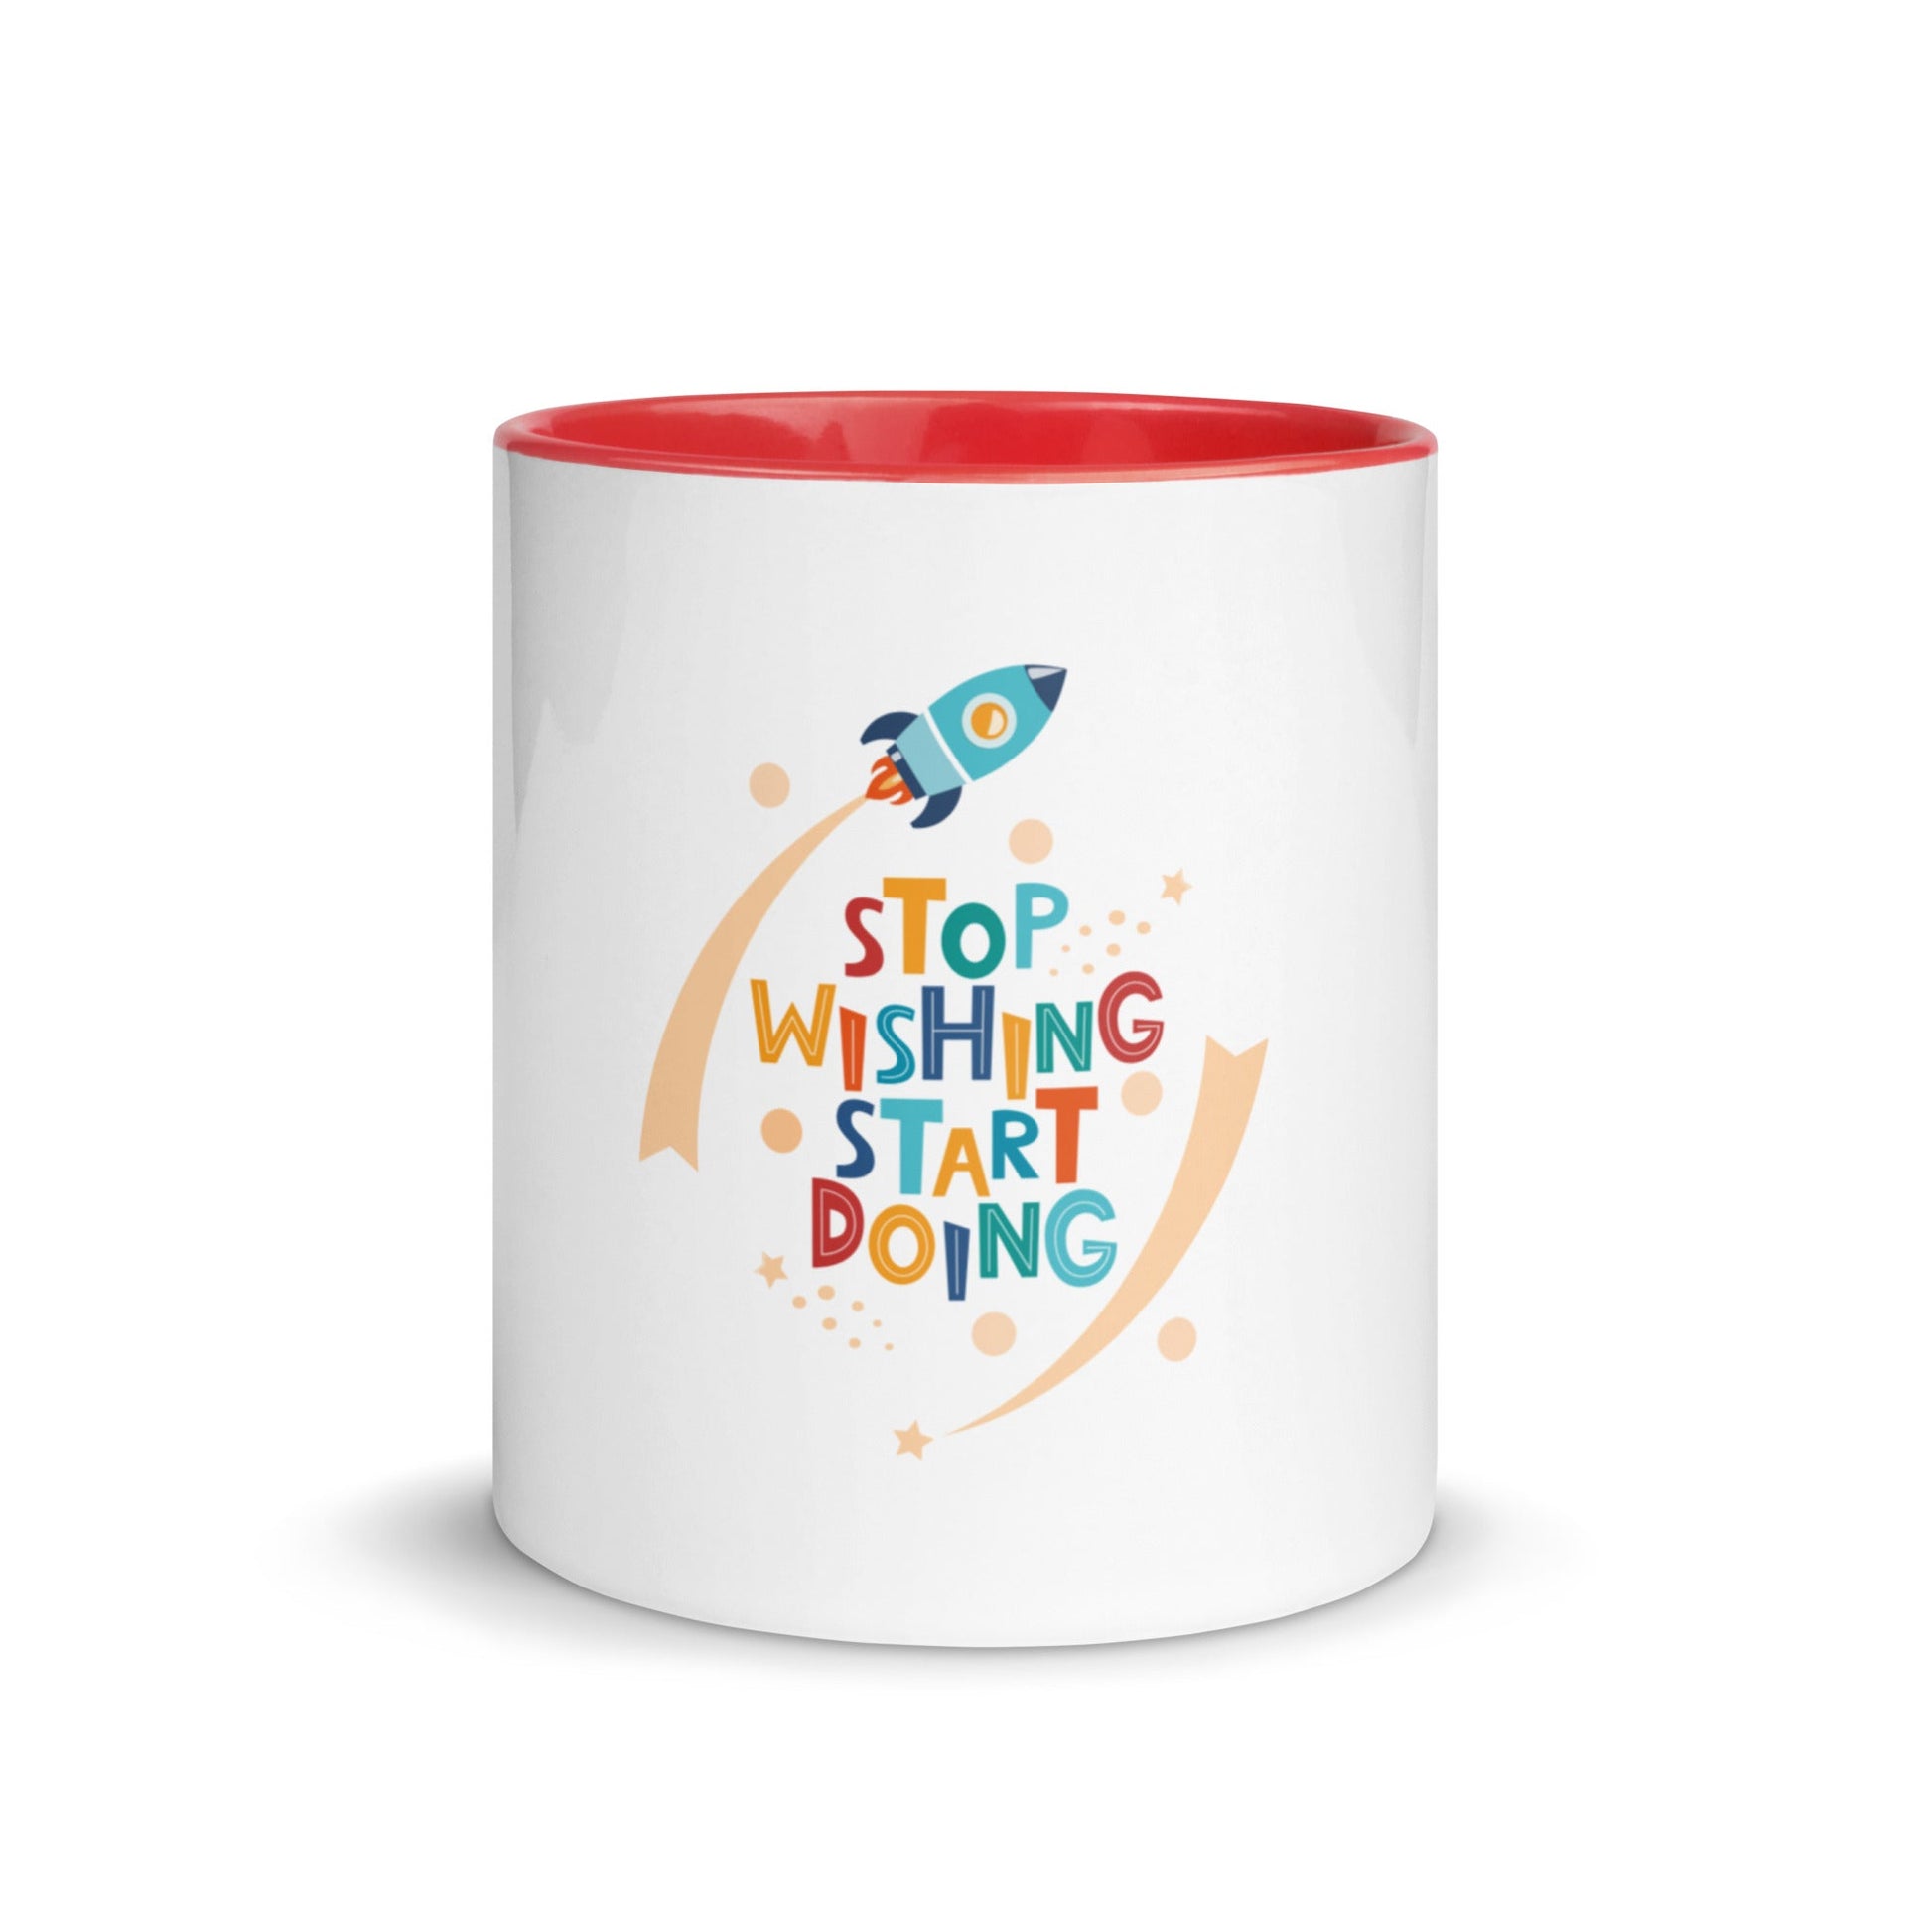 Stop Wishing, Start Doing Mug - Transform Dreams into Reality | Motivational Coffee Cup for Action Takers